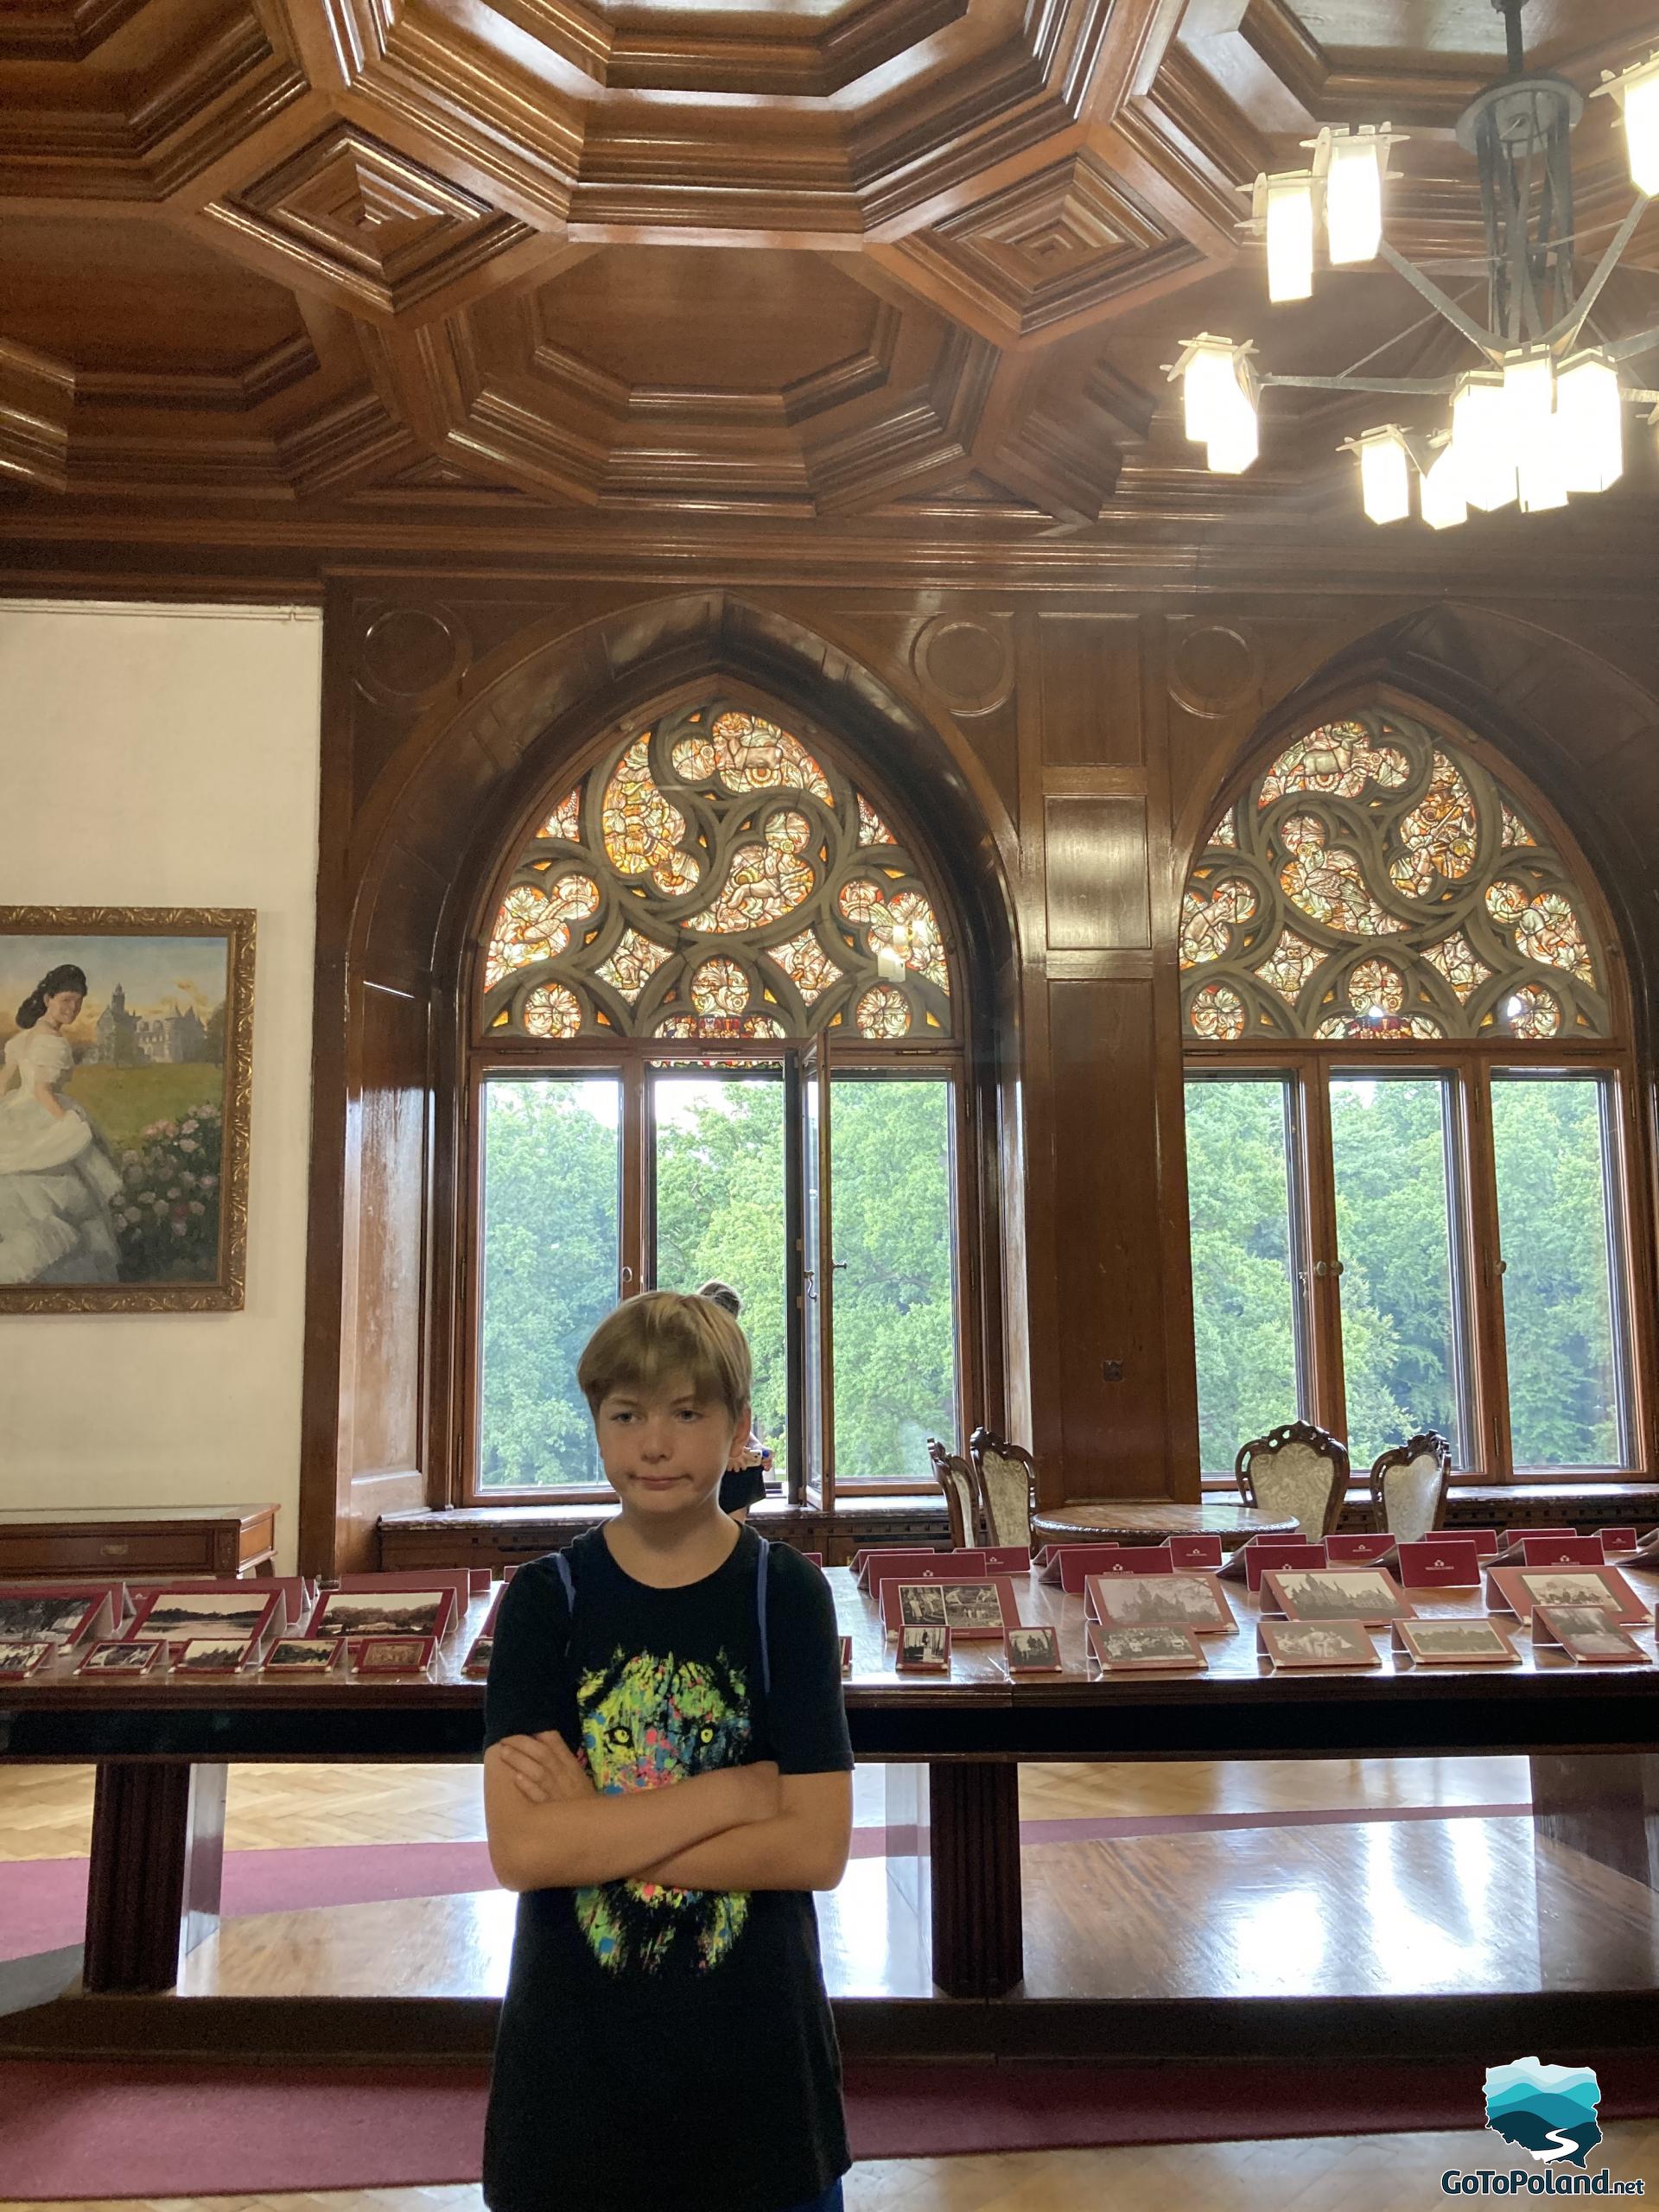 the boy stands in the hall, behind him is a table with postcards and two windows in the Gothic style